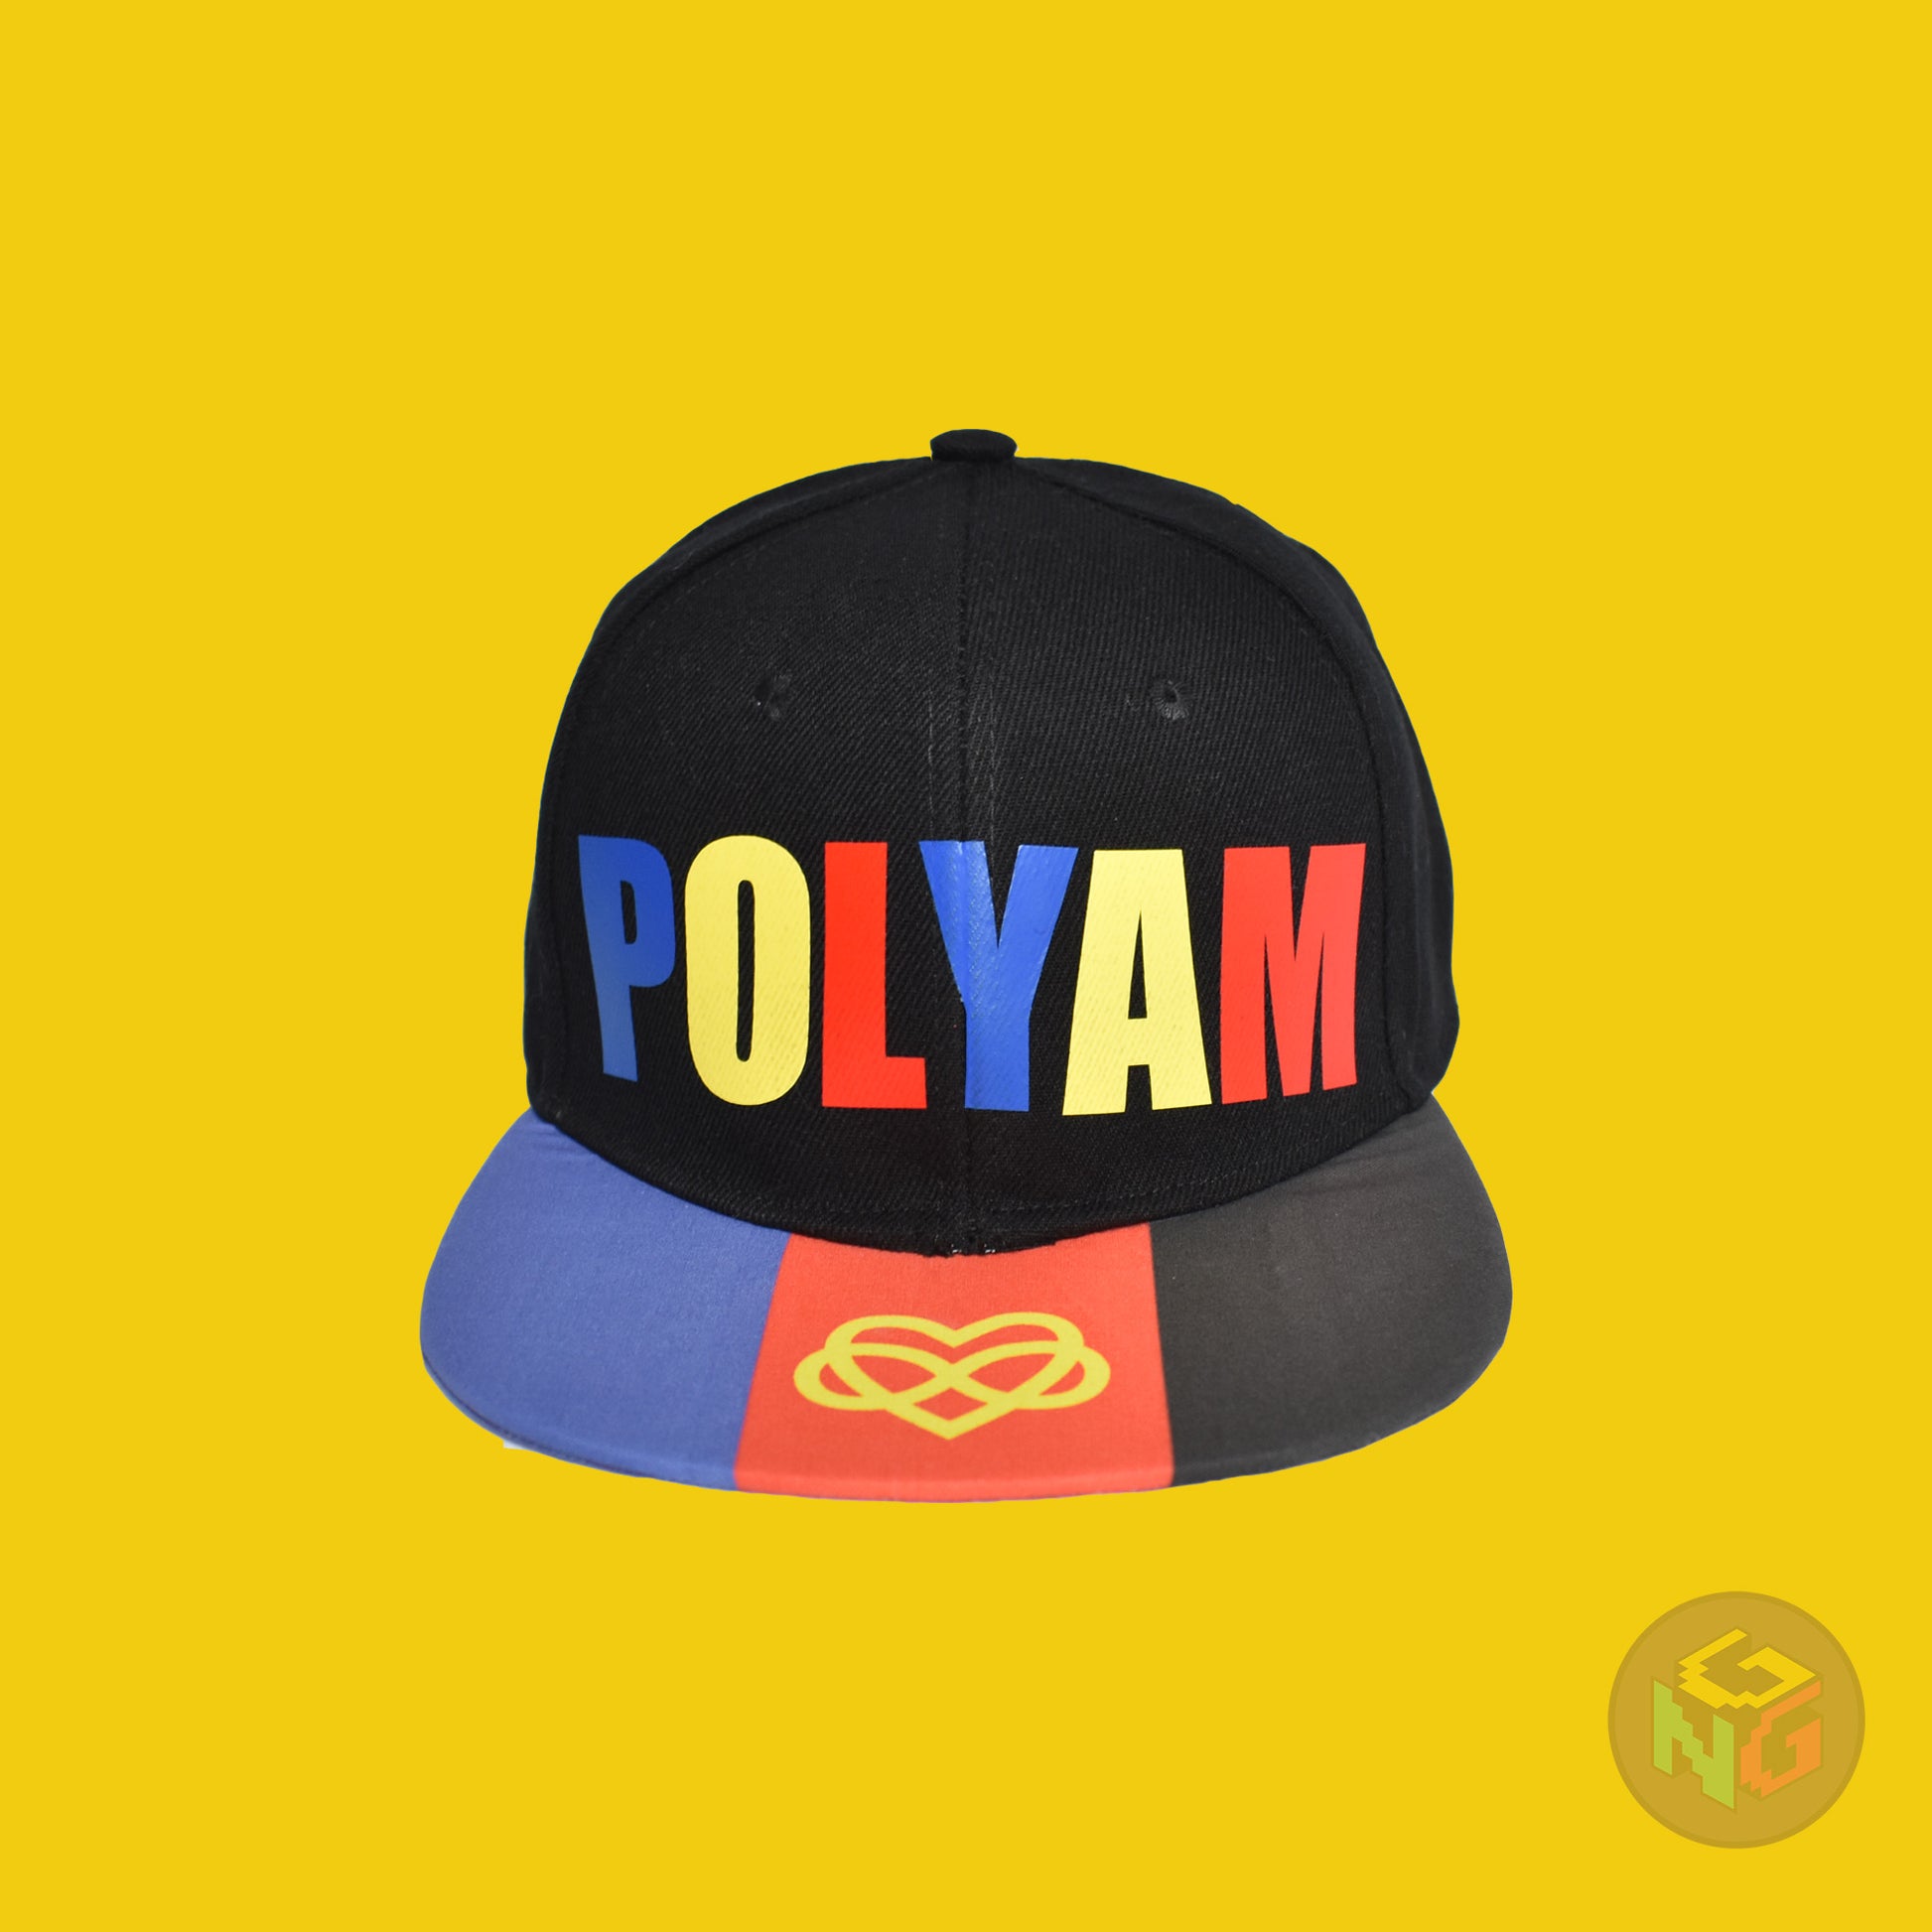 Black flat bill snapback hat. The brim has the polyamory pride flag with the heart infinity symbol on both sides and the front of the hat has the word “POLYAM” in red, yellow, and blue letters. Front view